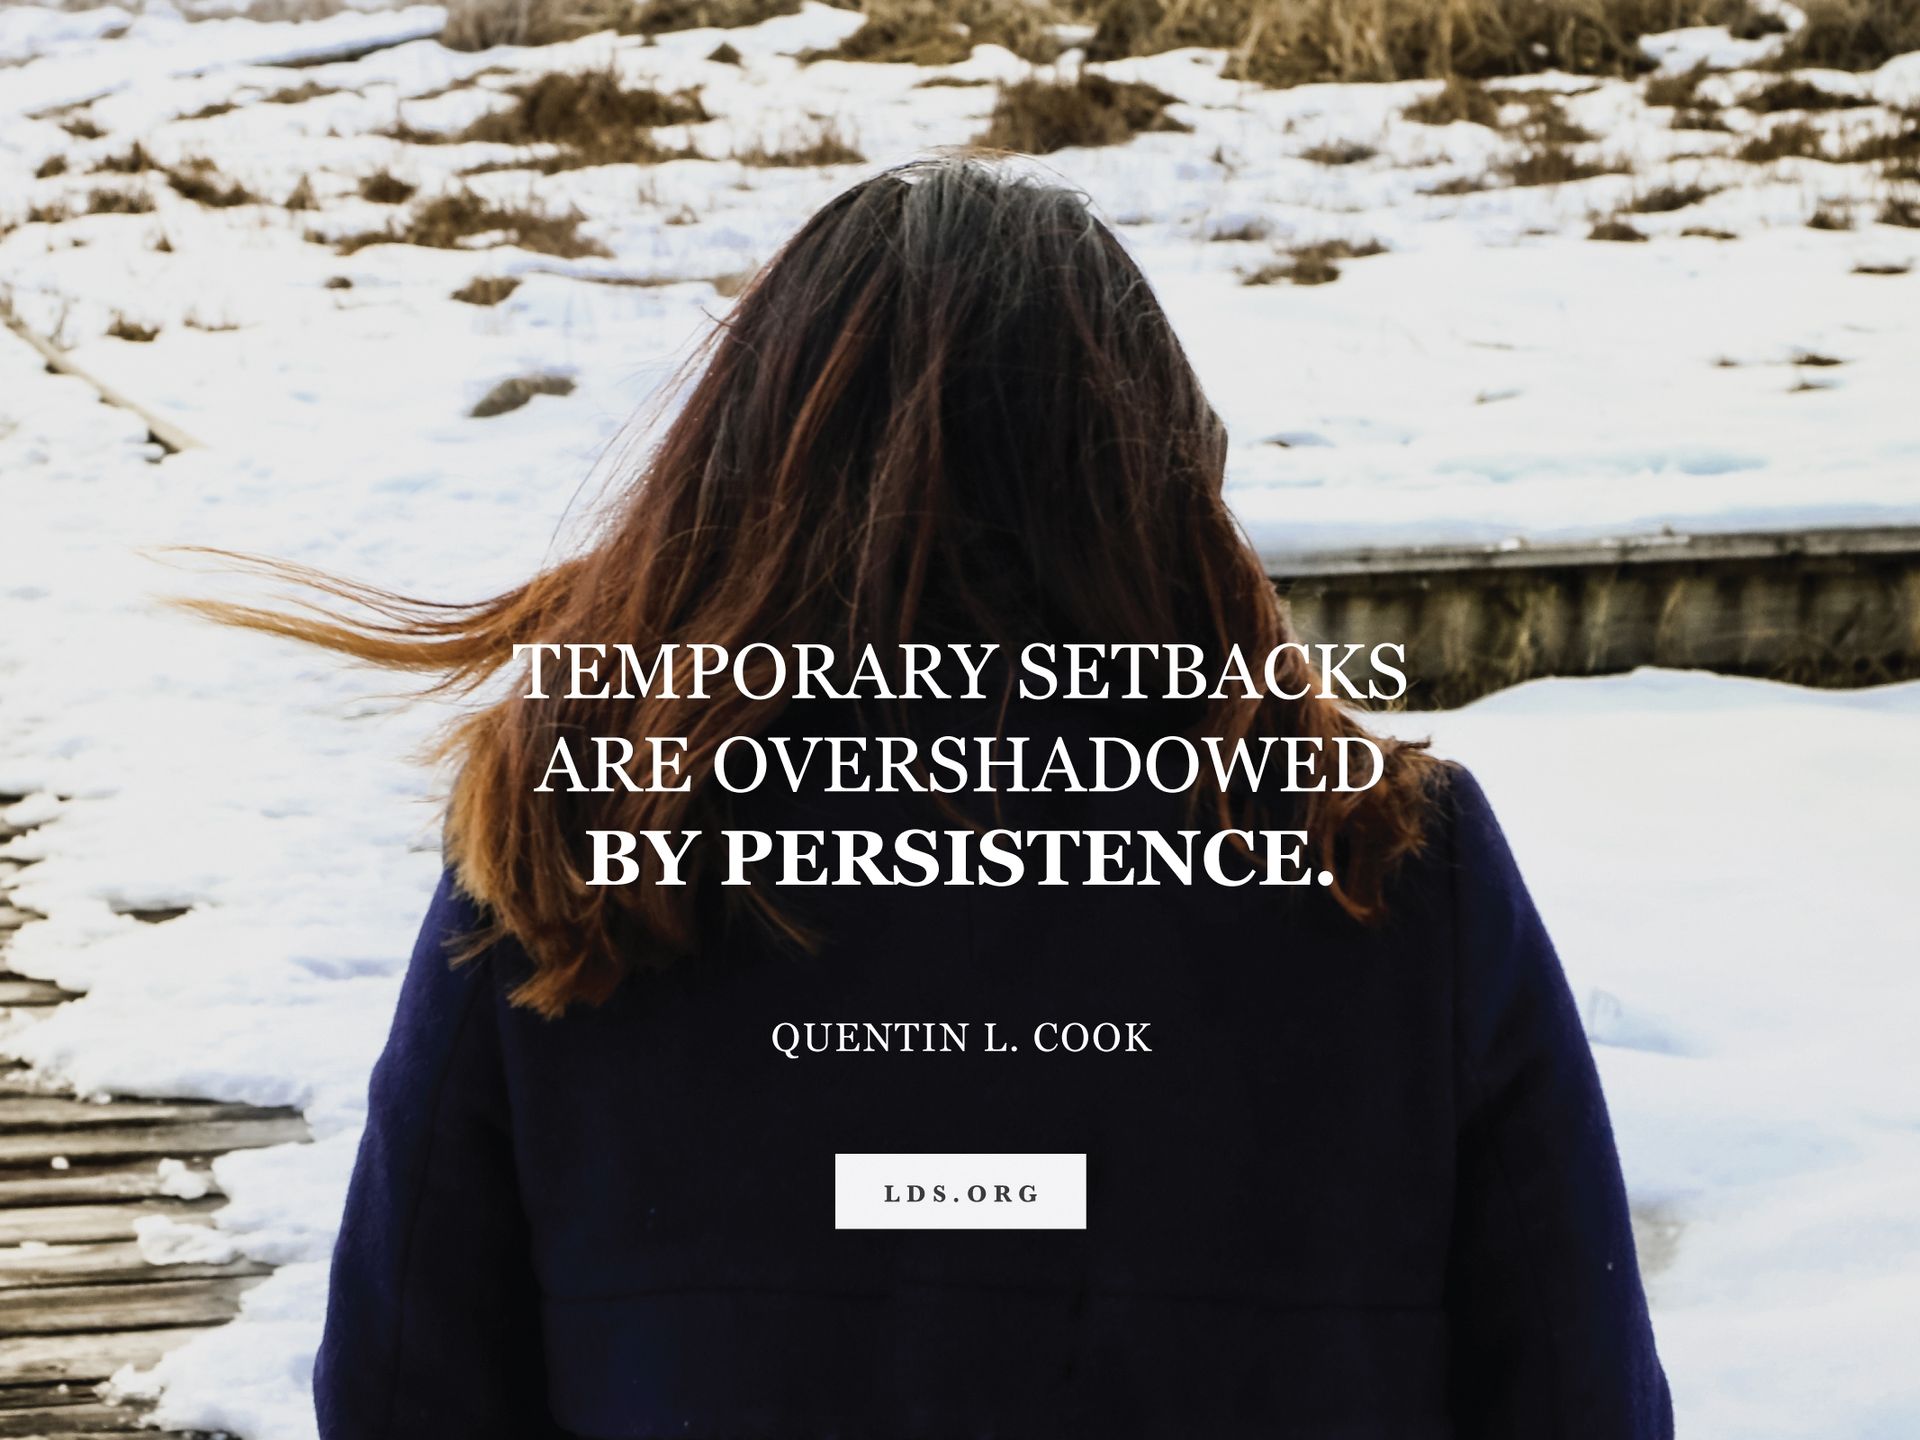 “Temporary setbacks are overshadowed by persistence.” —Elder Quentin L. Cook, “In Tune with the Music of Faith”